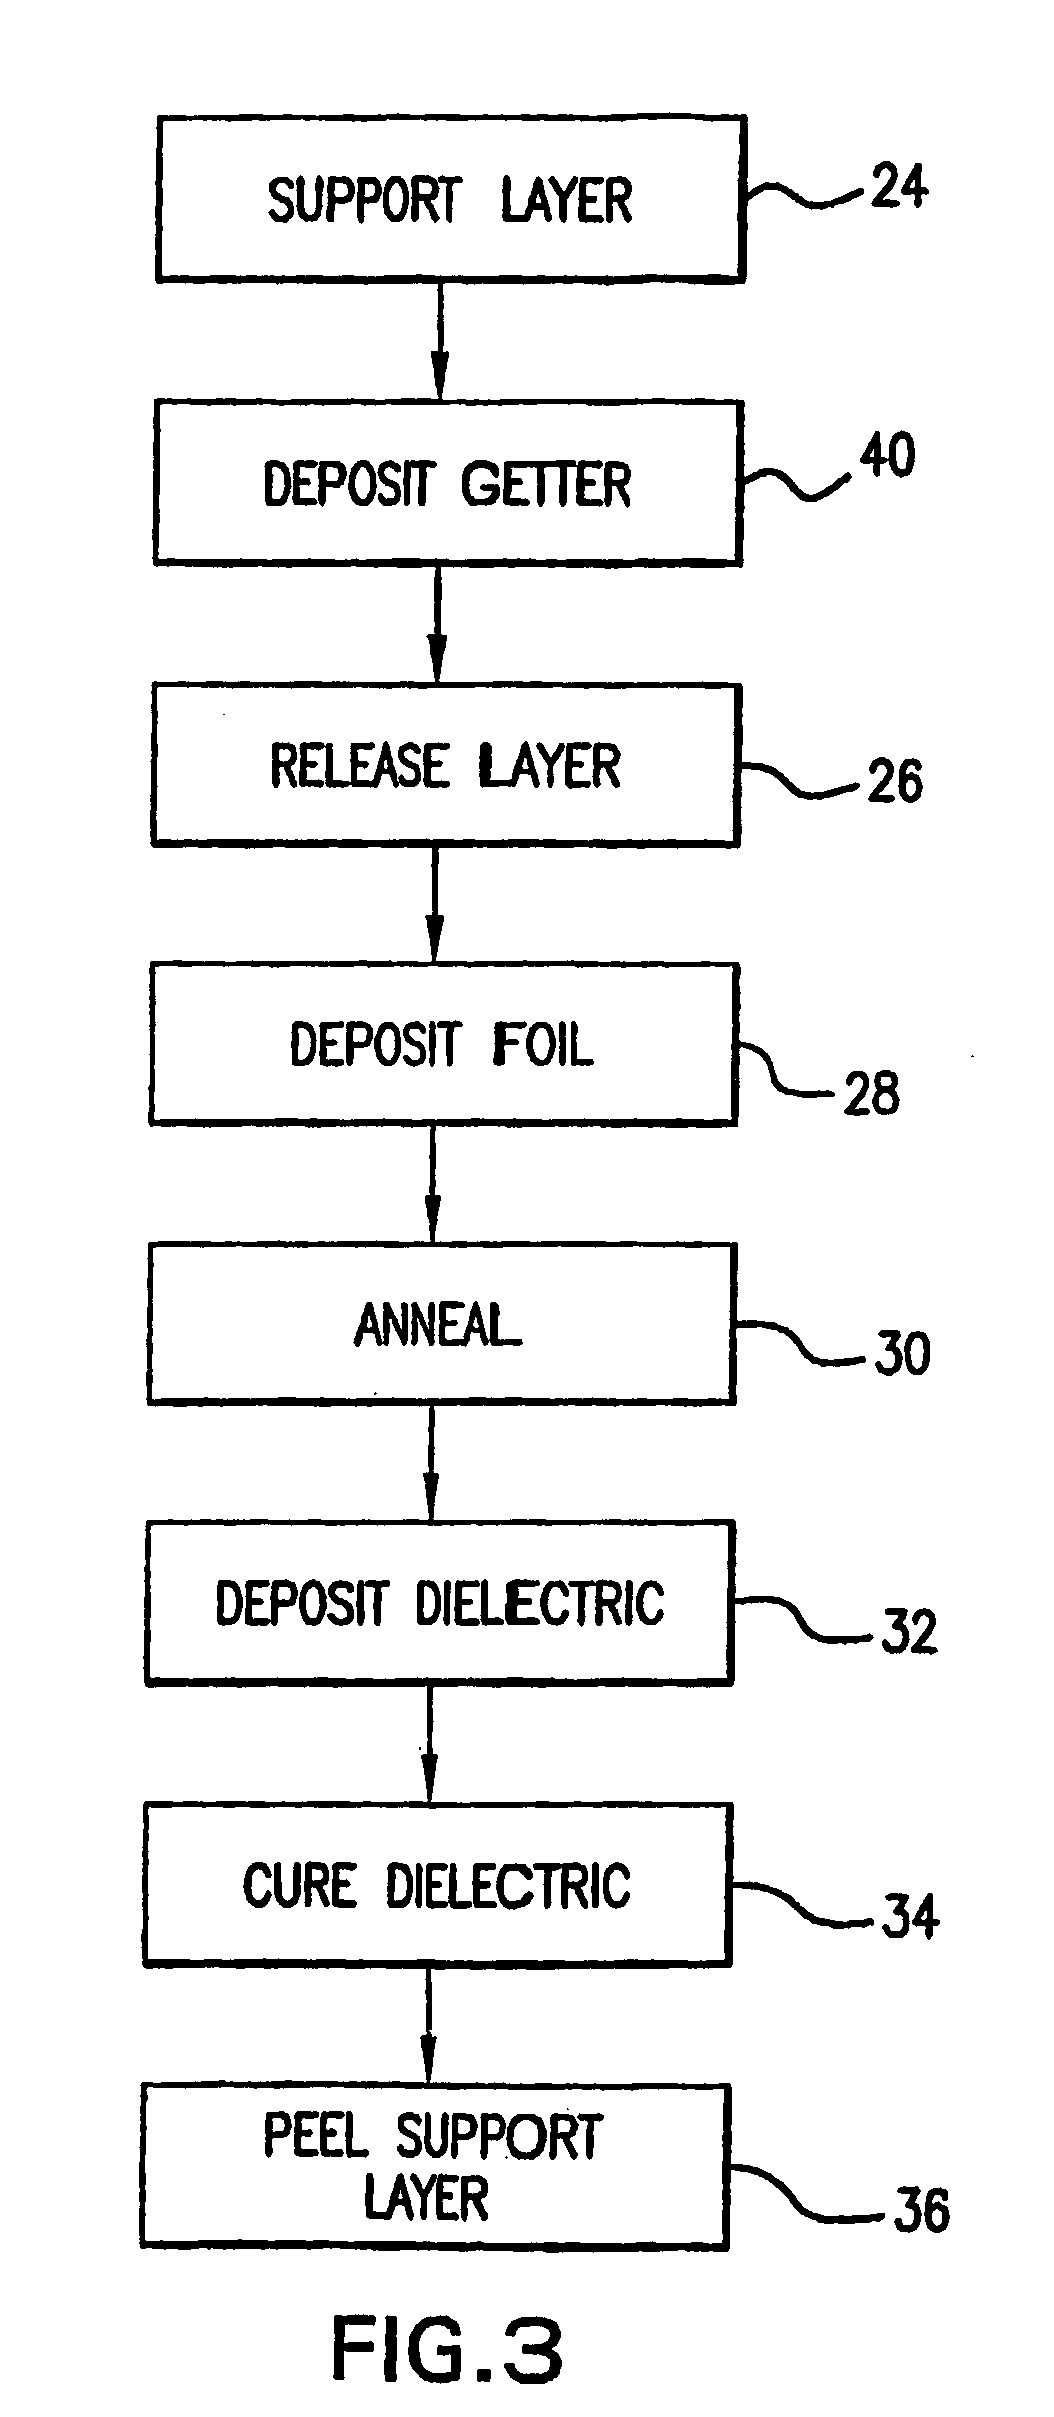 Support layer for thin copper foil